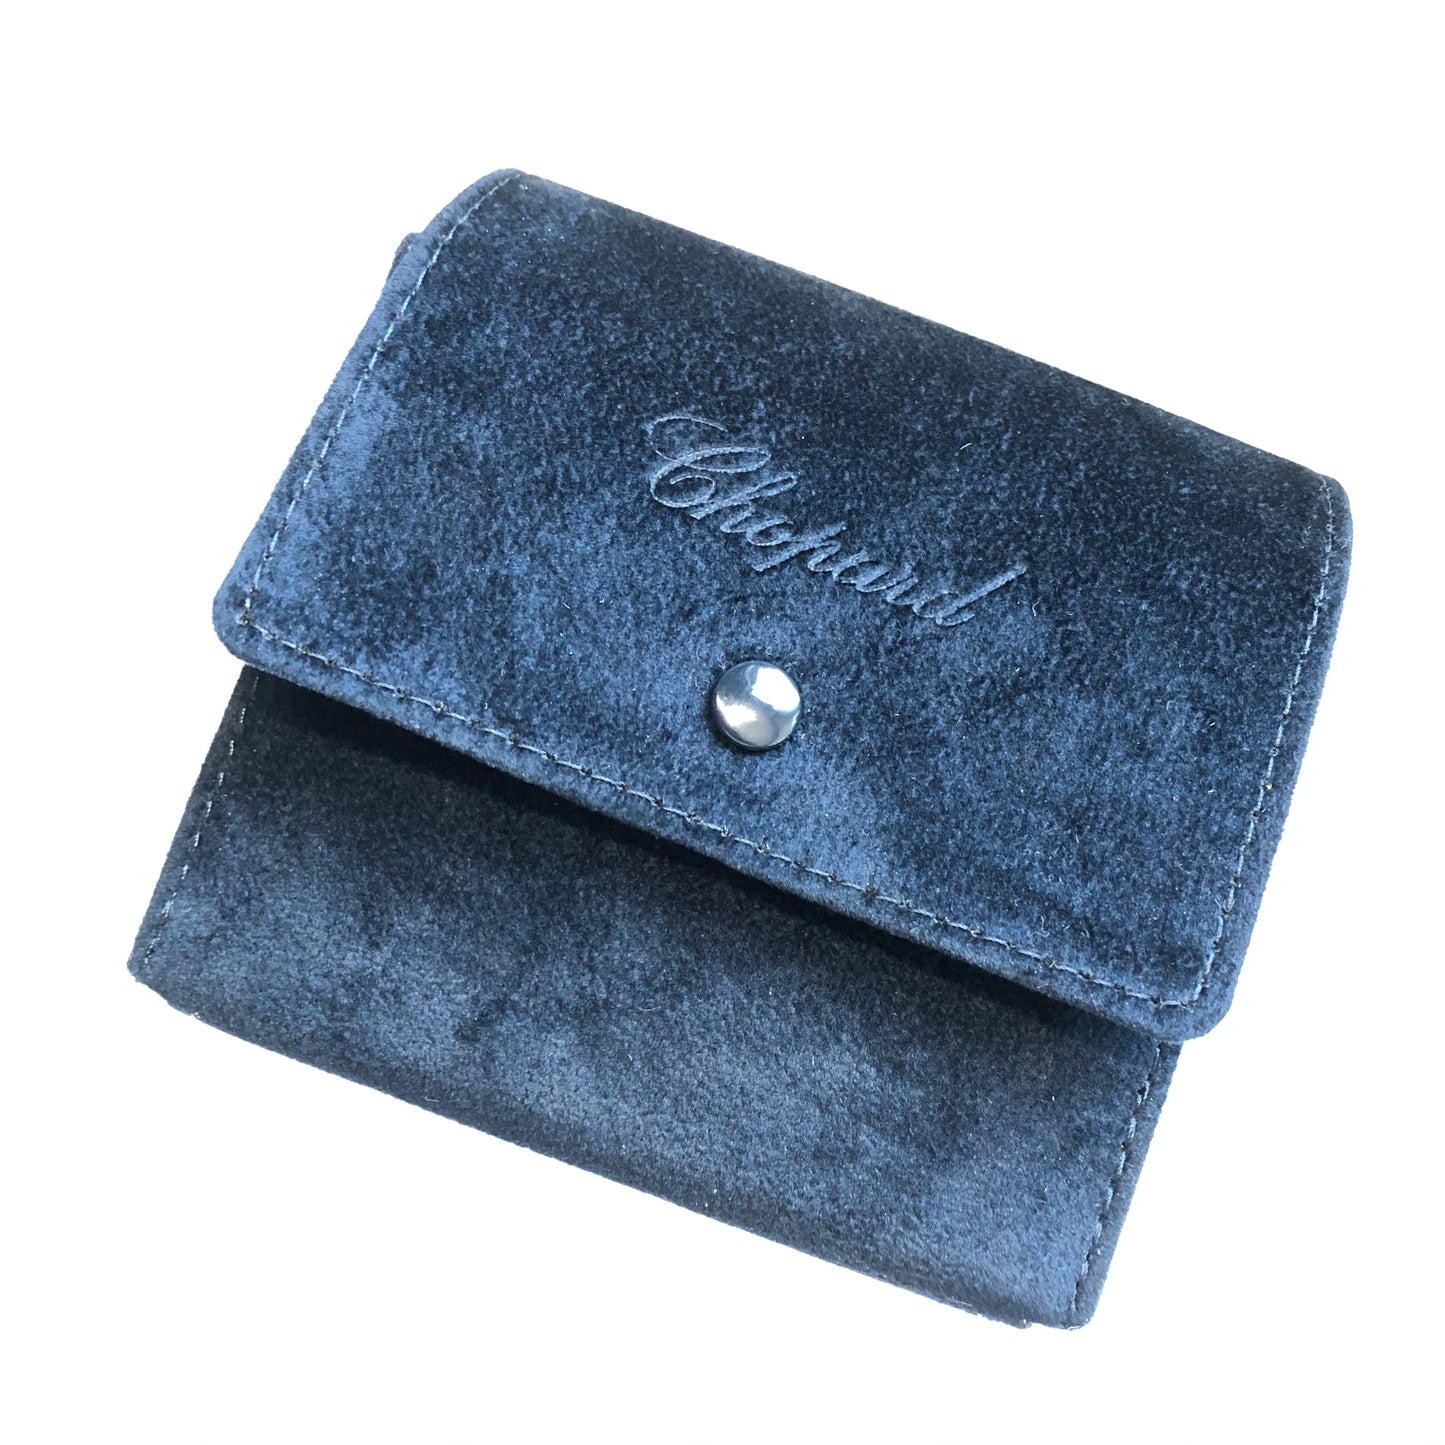 CHOPARD Blue Faux Suede Case with Holder  4 x 4 x 2 inches